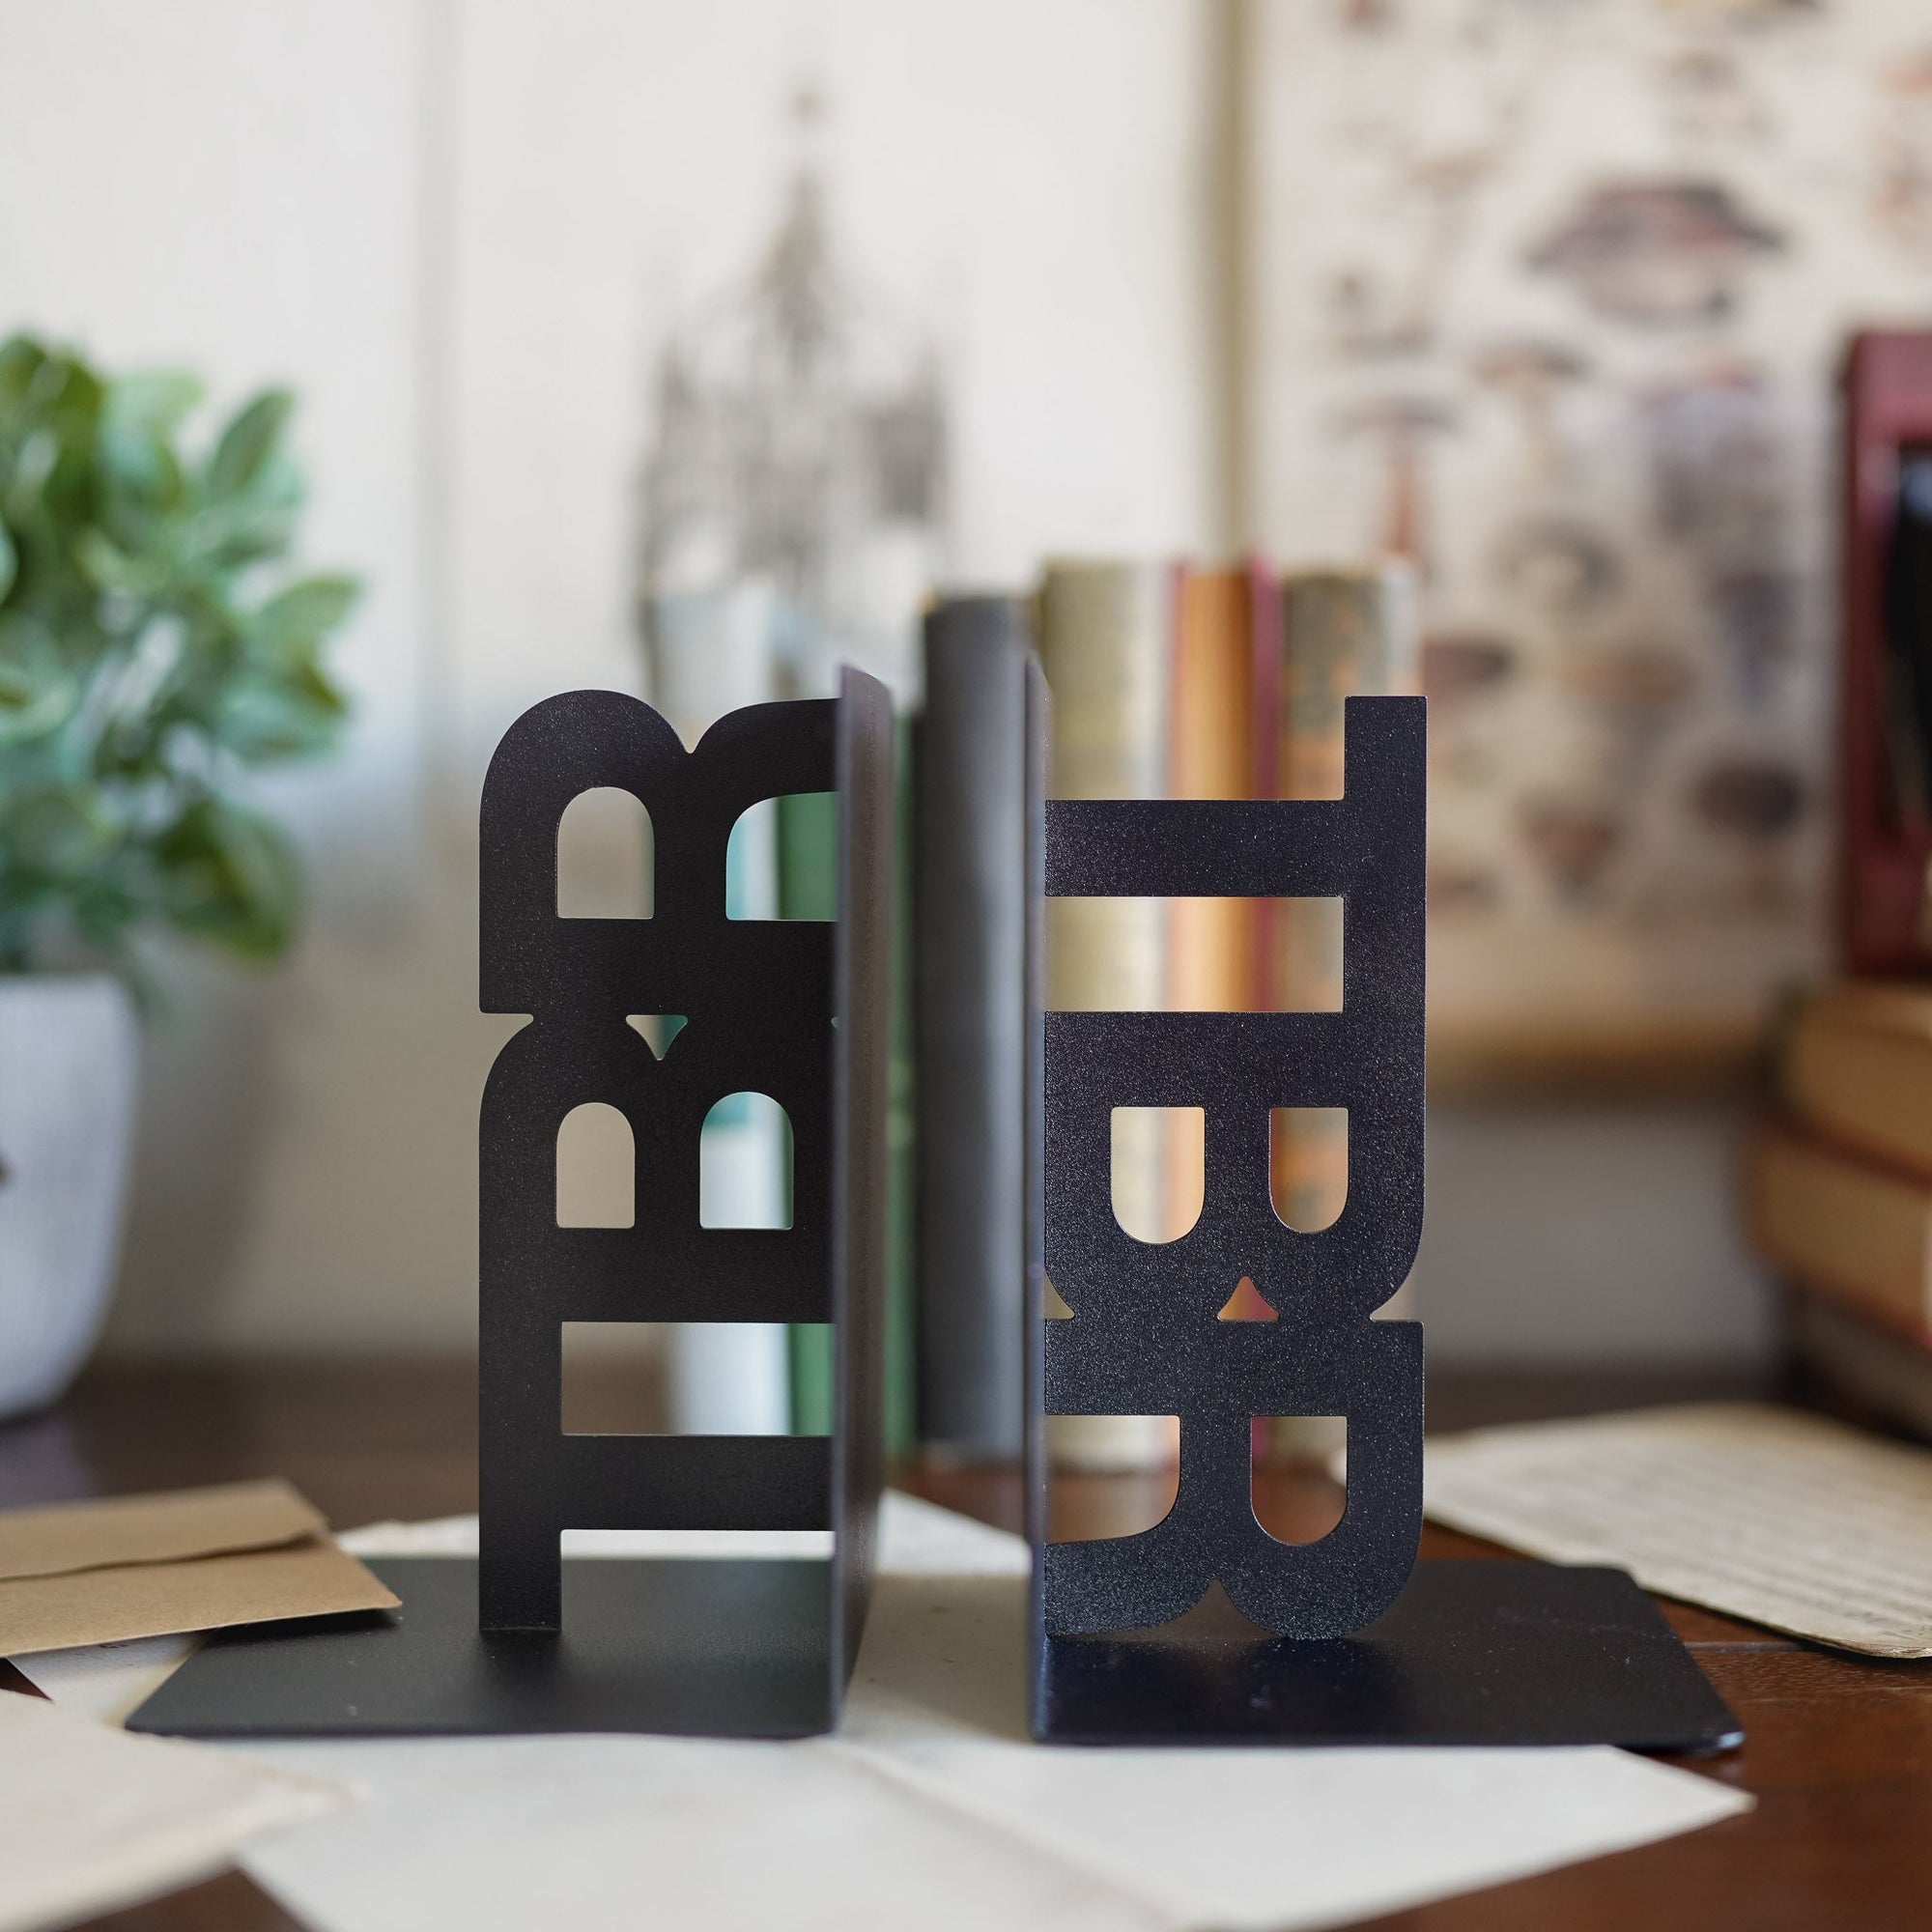 Black TBR bookends with "TBR" in block letters sitting on their sides